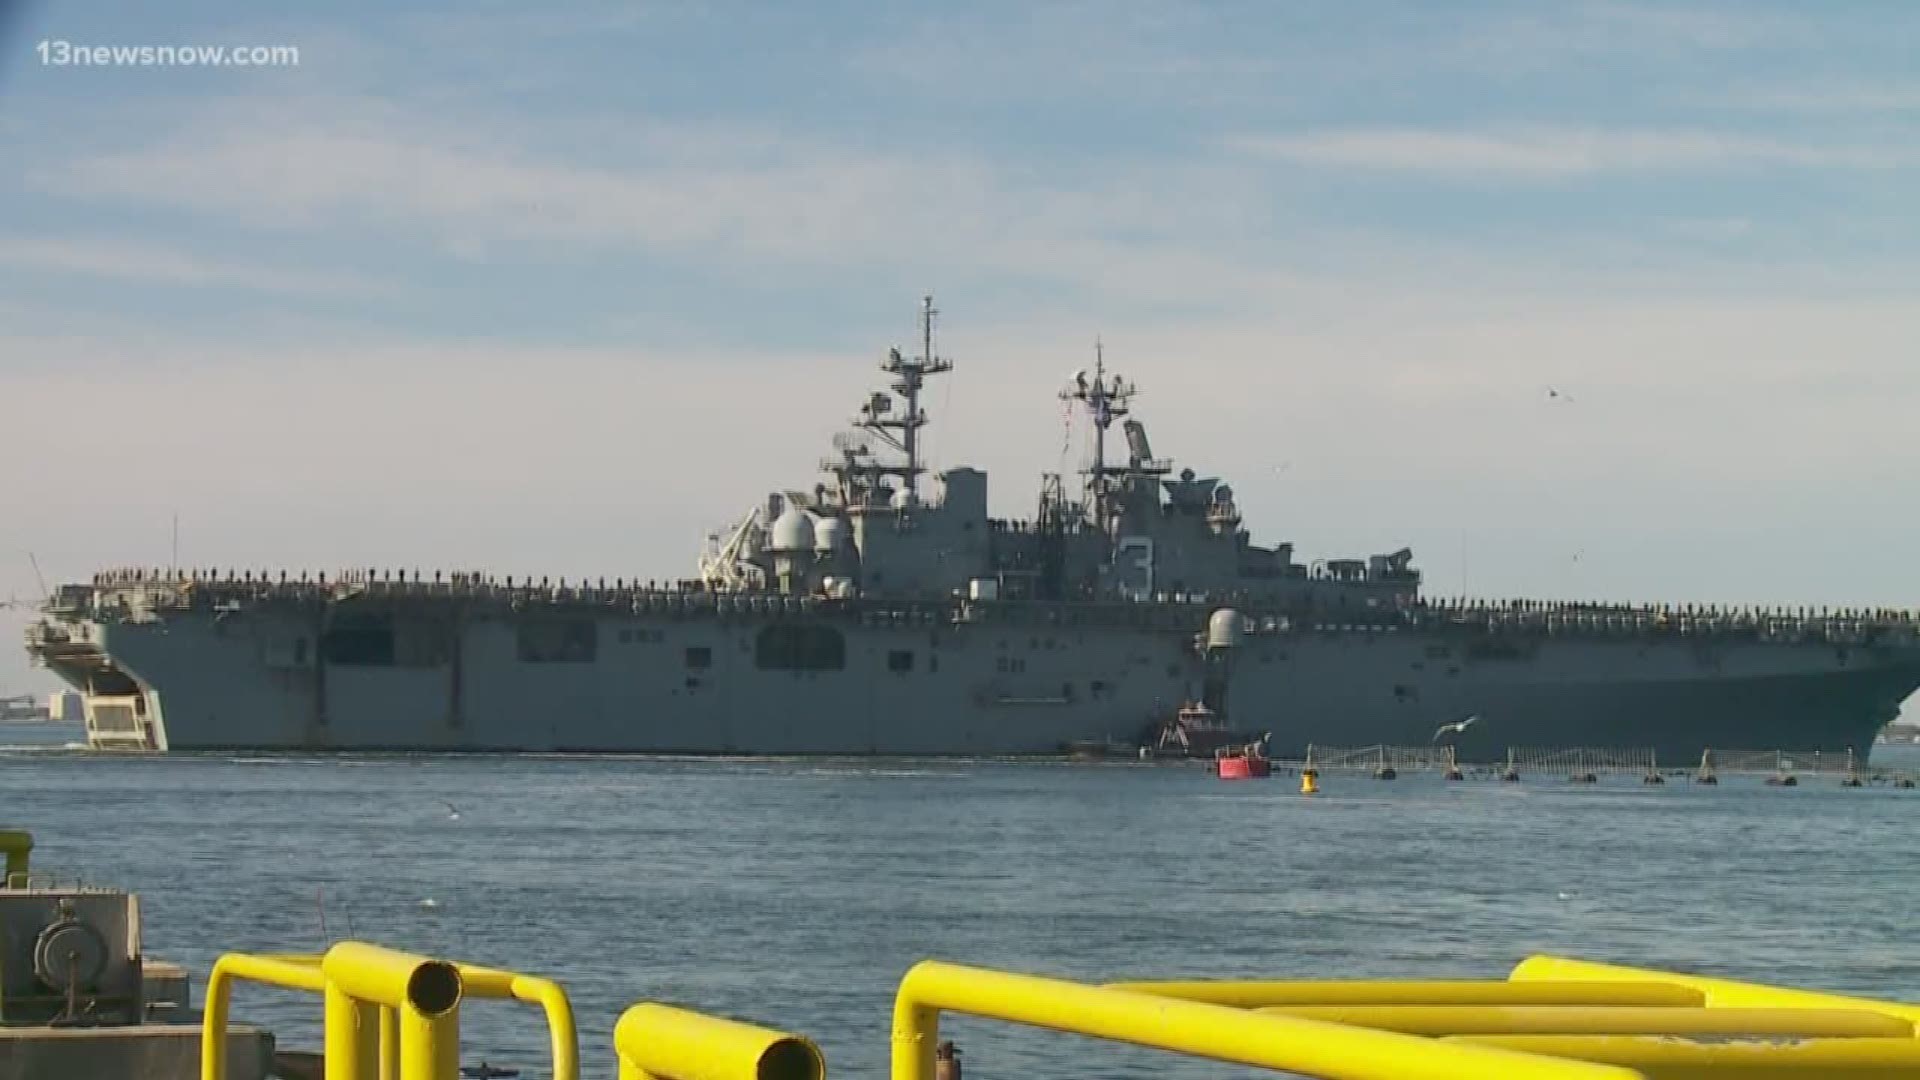 After a seven month deployment, the sailors and marines will return to Norfolk on July 18.